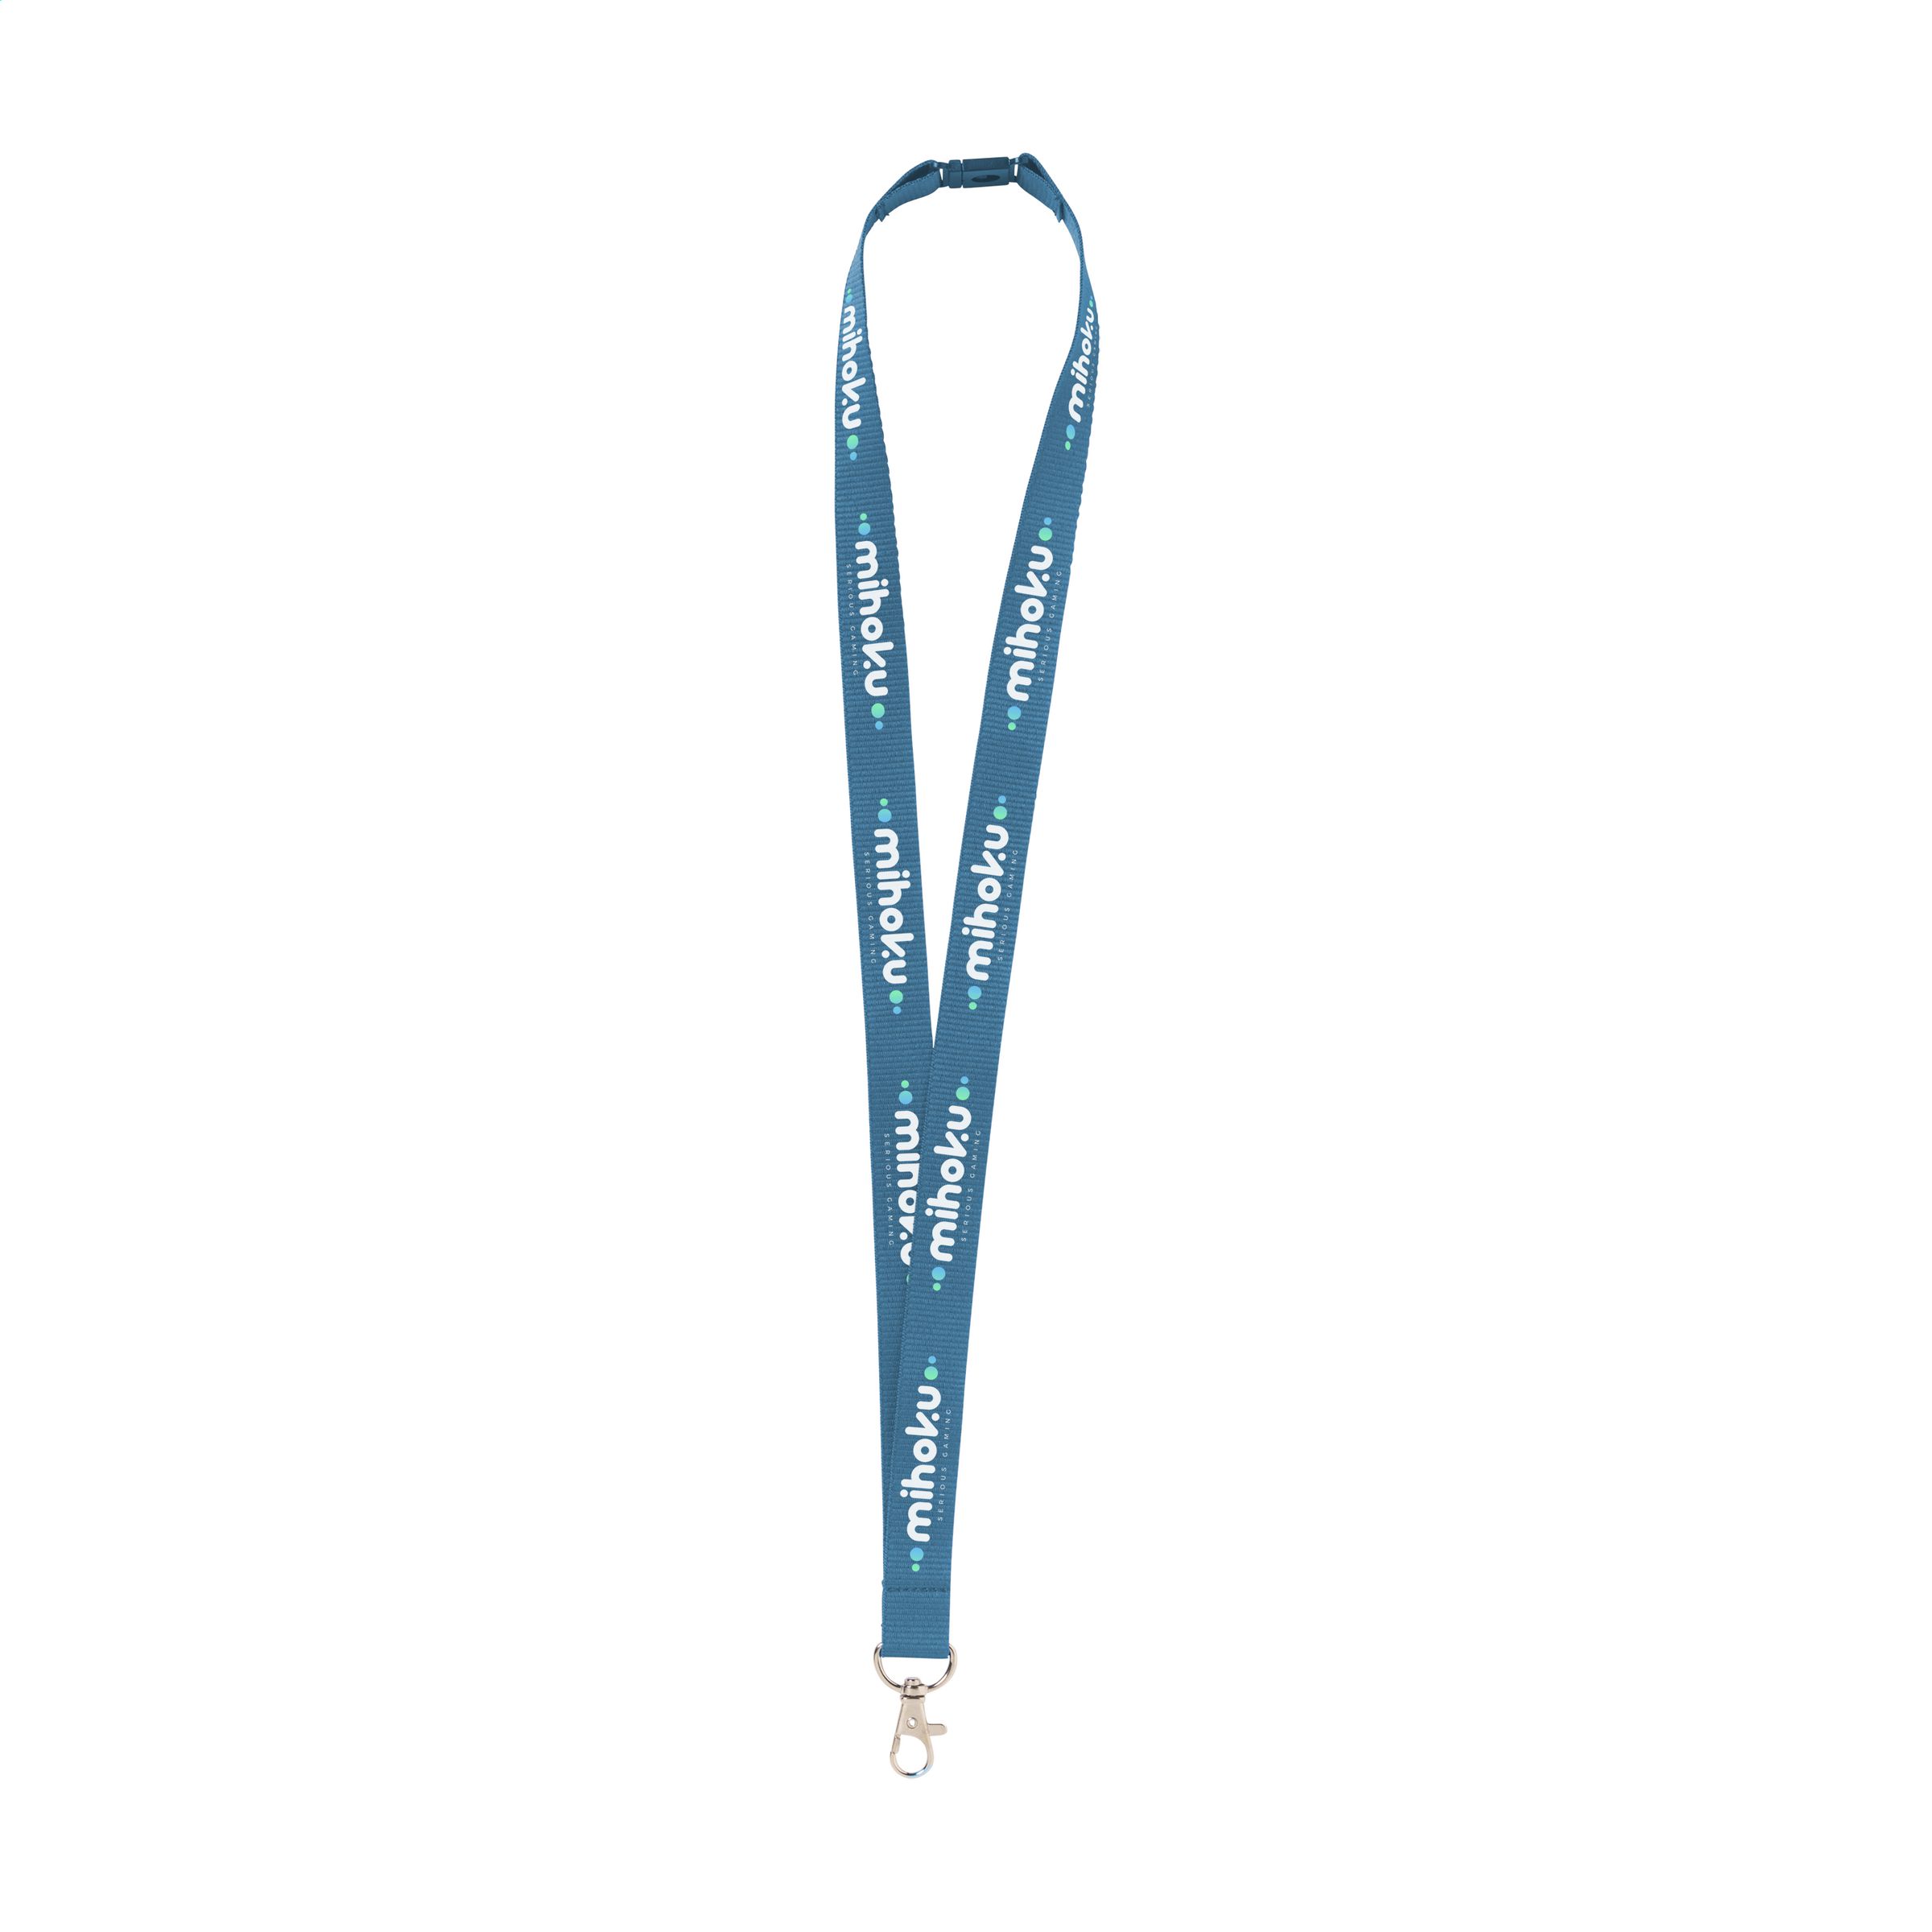 Full-Colour Sublimation Printed Lanyard with Metal Carabiner and Plastic Safety Lock - Waterside